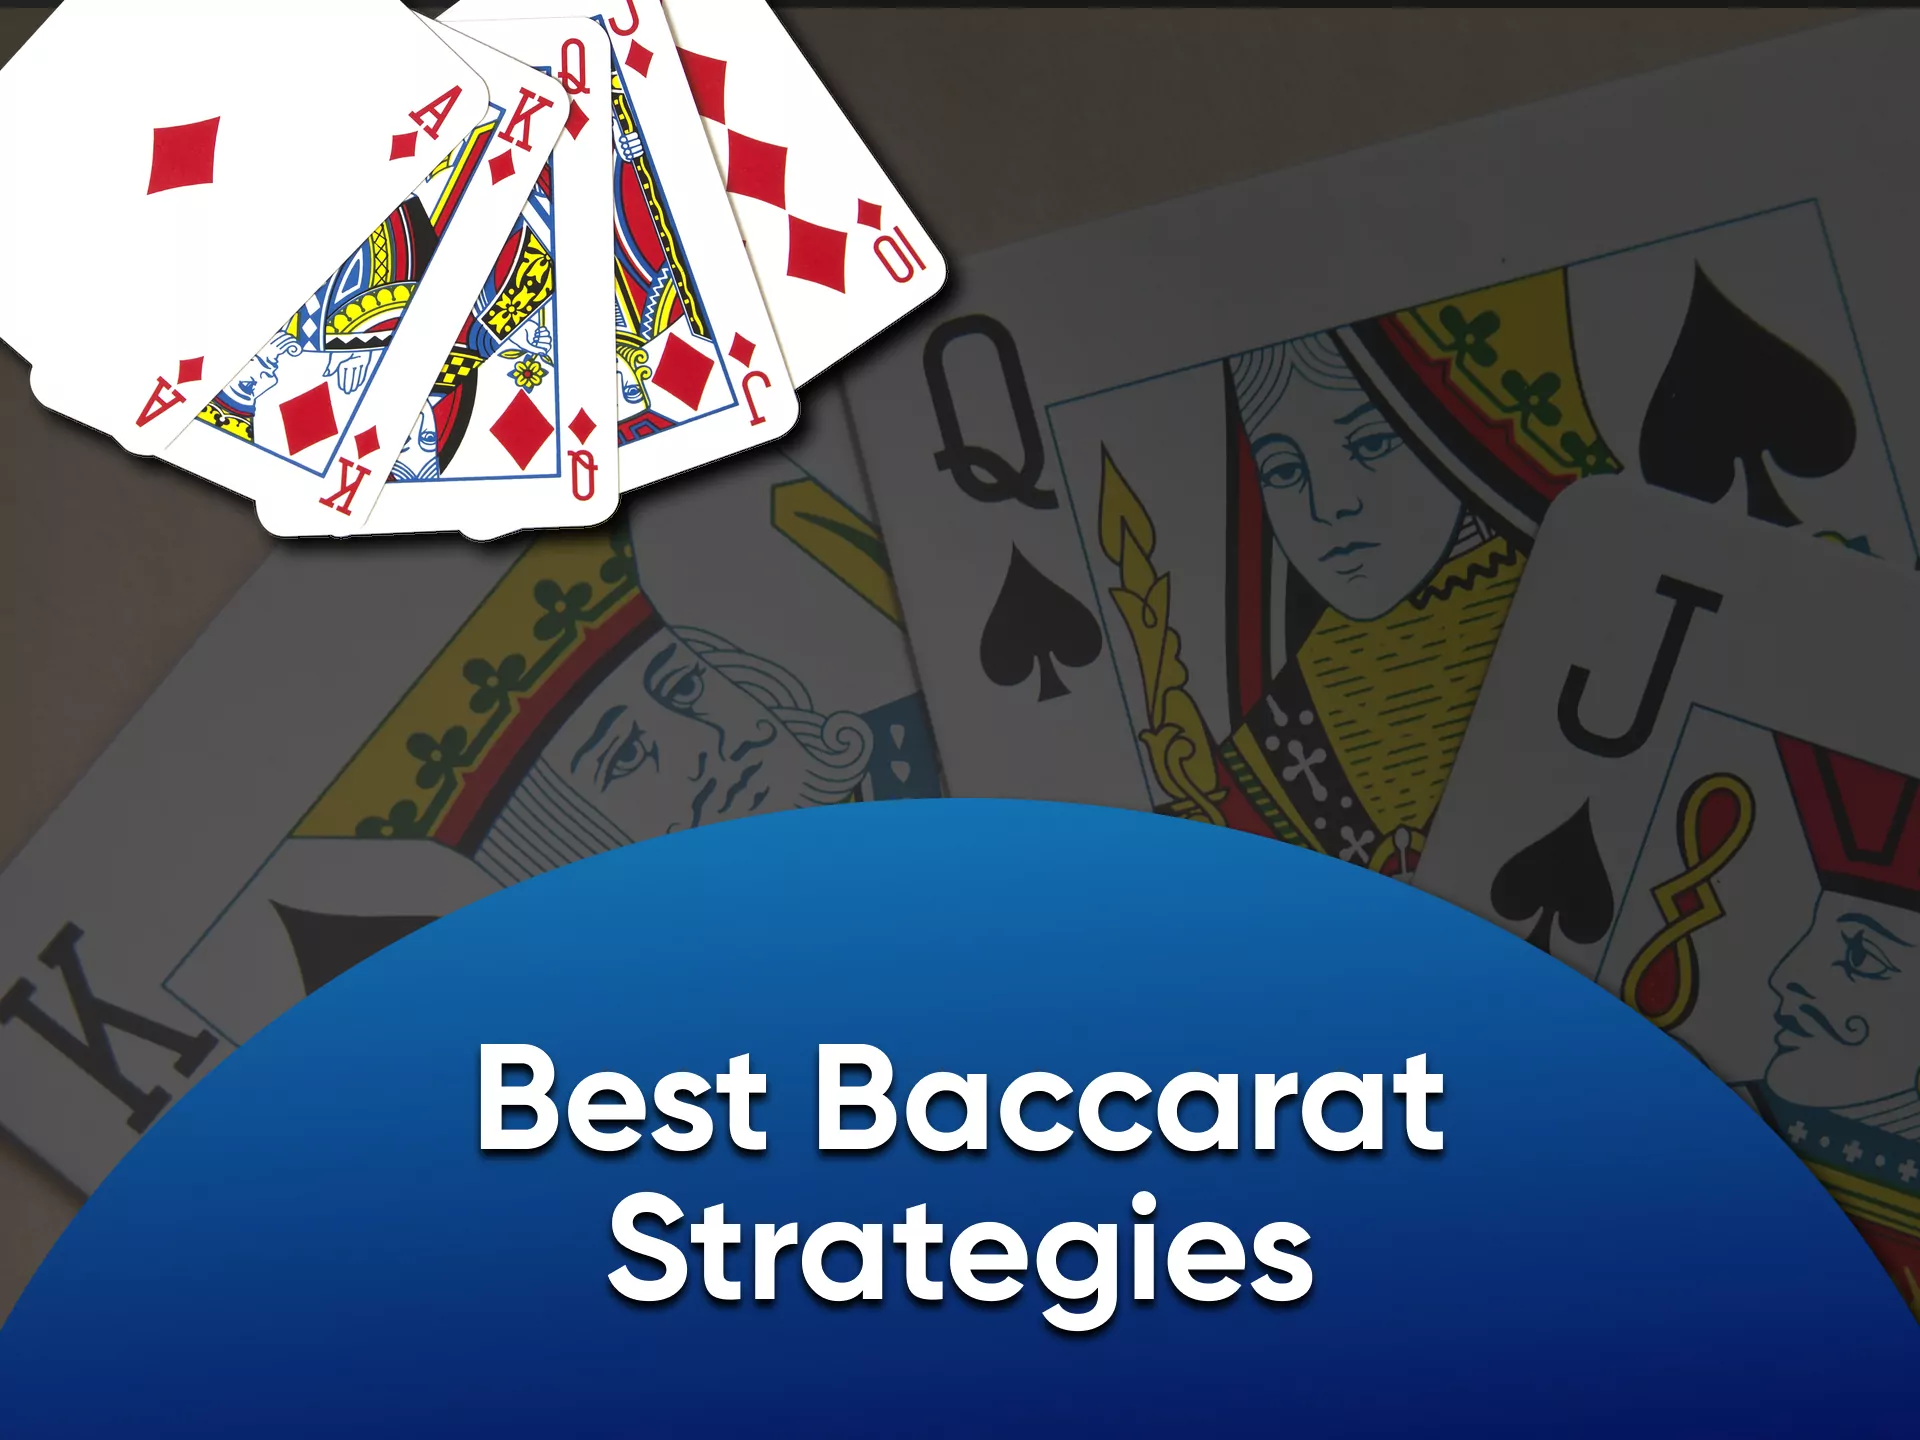 Play smart in Baccarat.